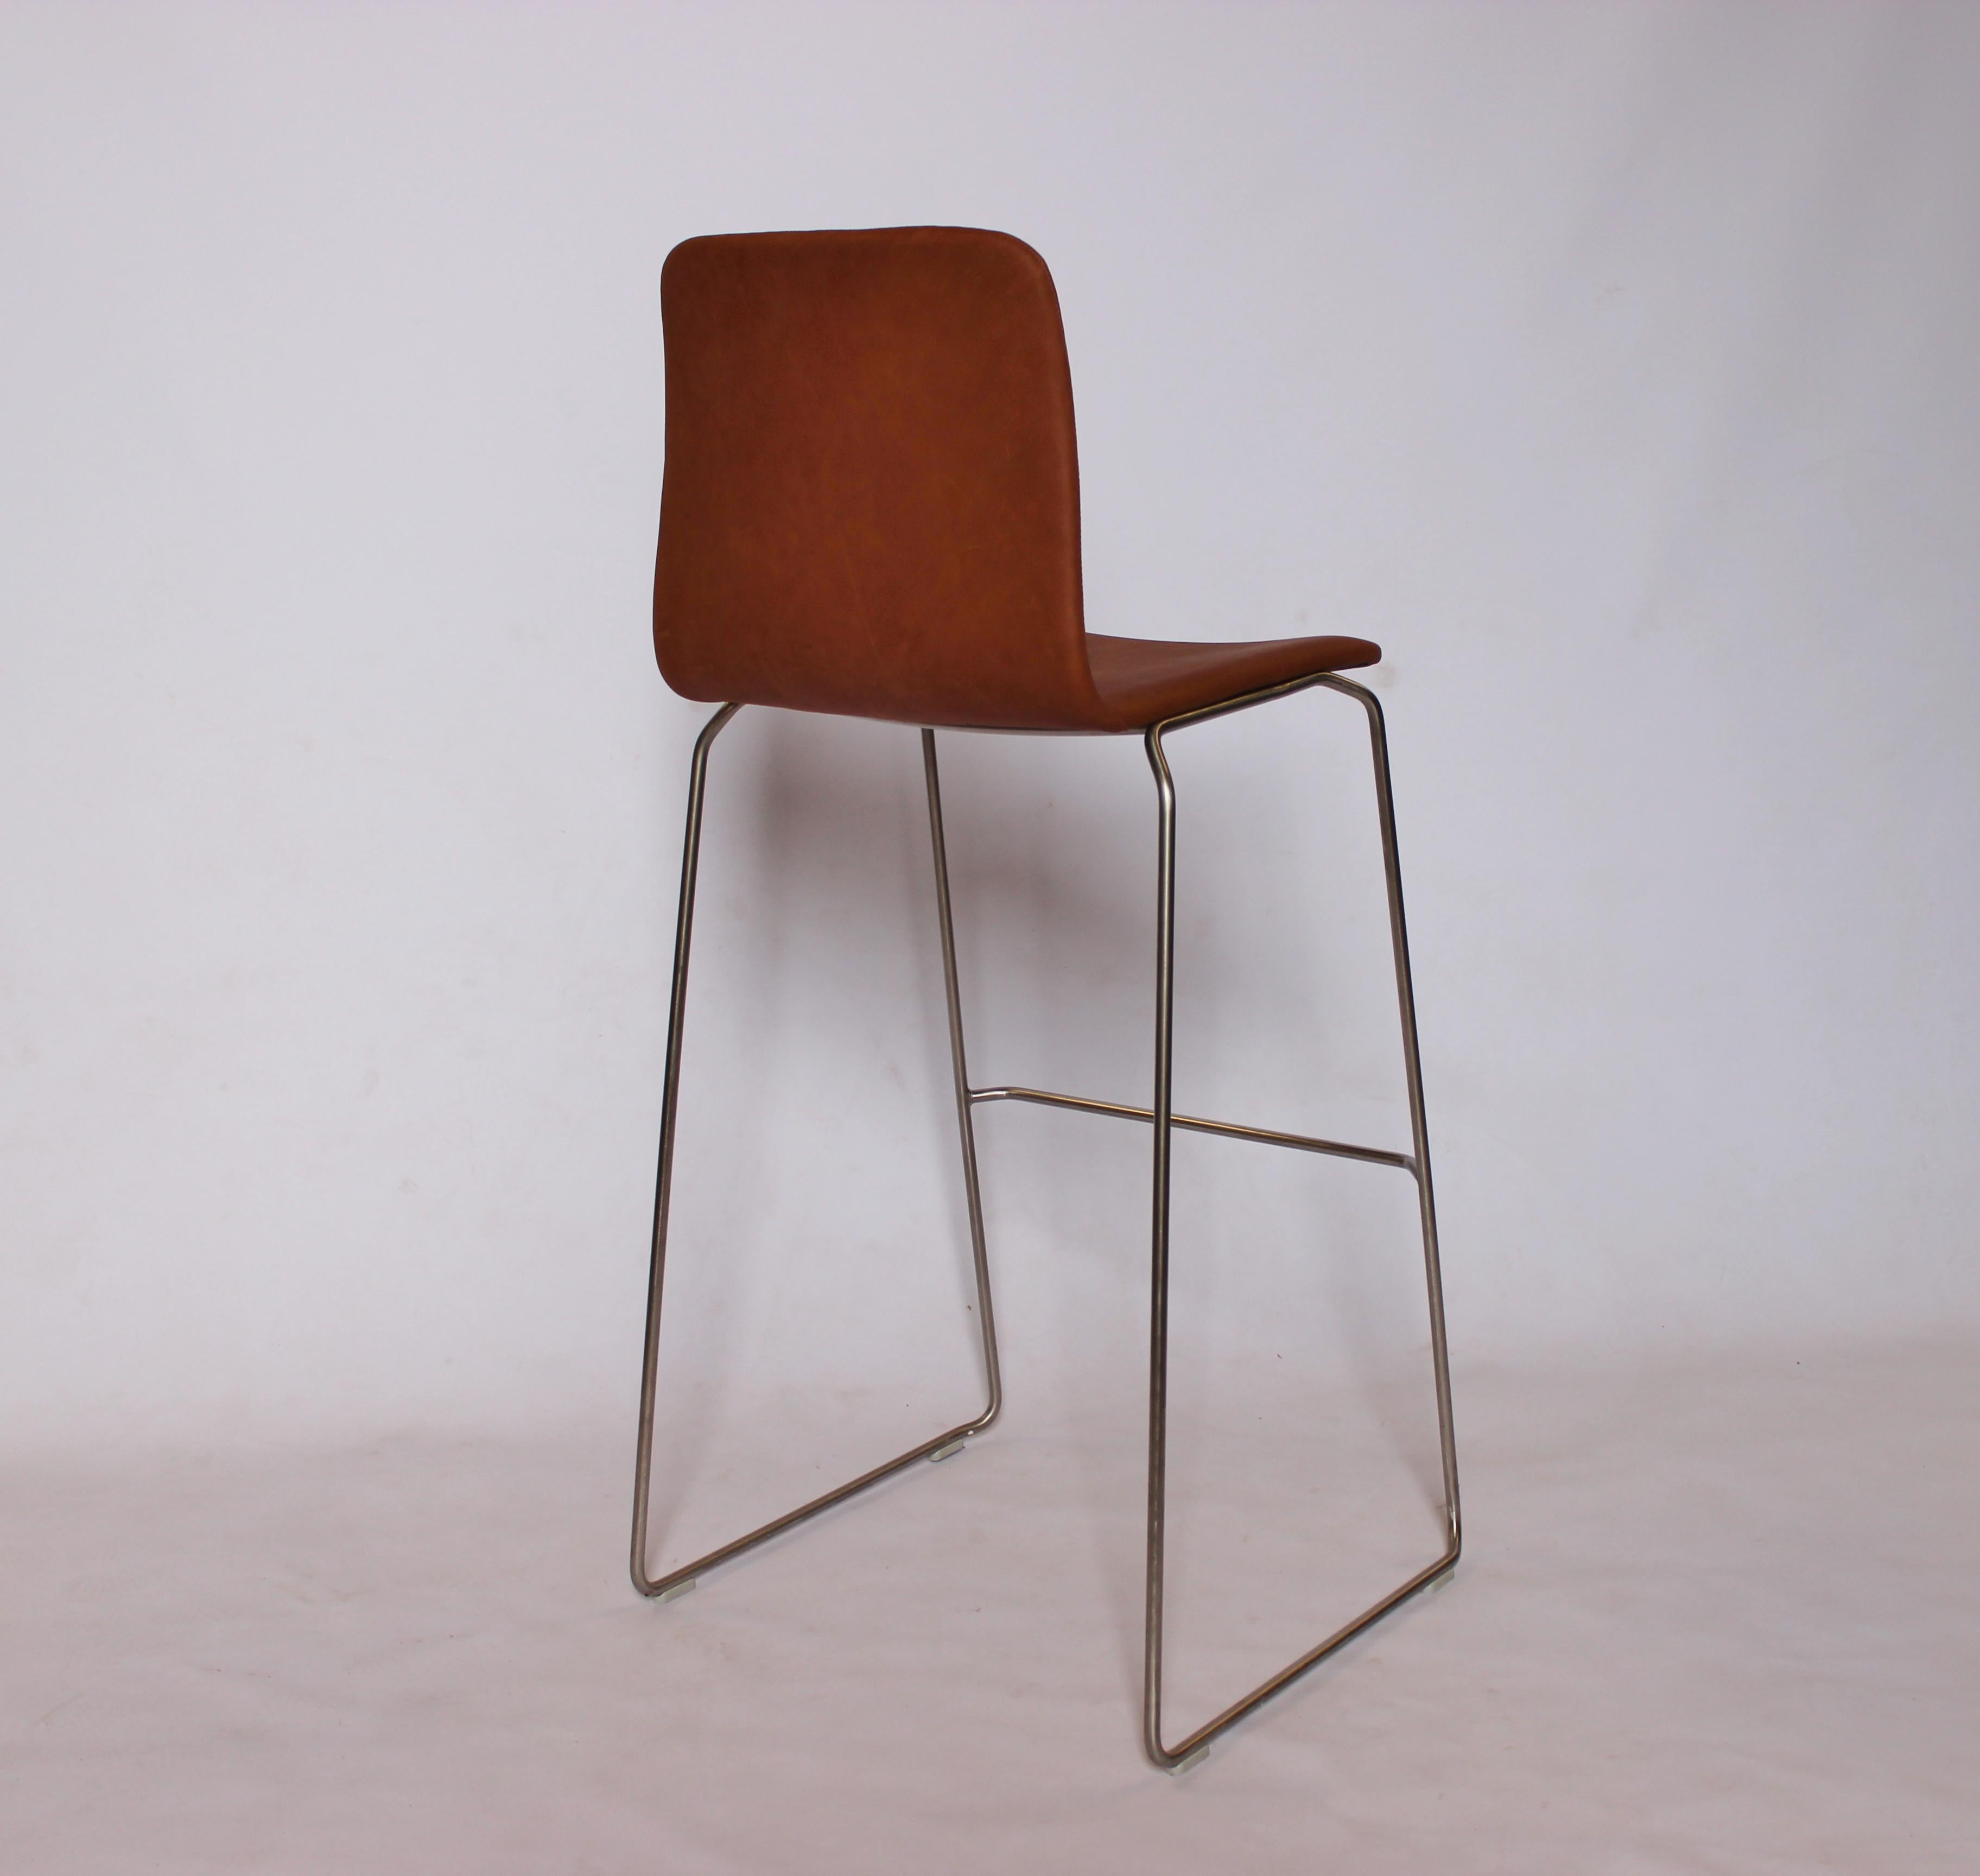 Danish Set of Four Barstools, Model JW01, by Jacob Wagner for HAY